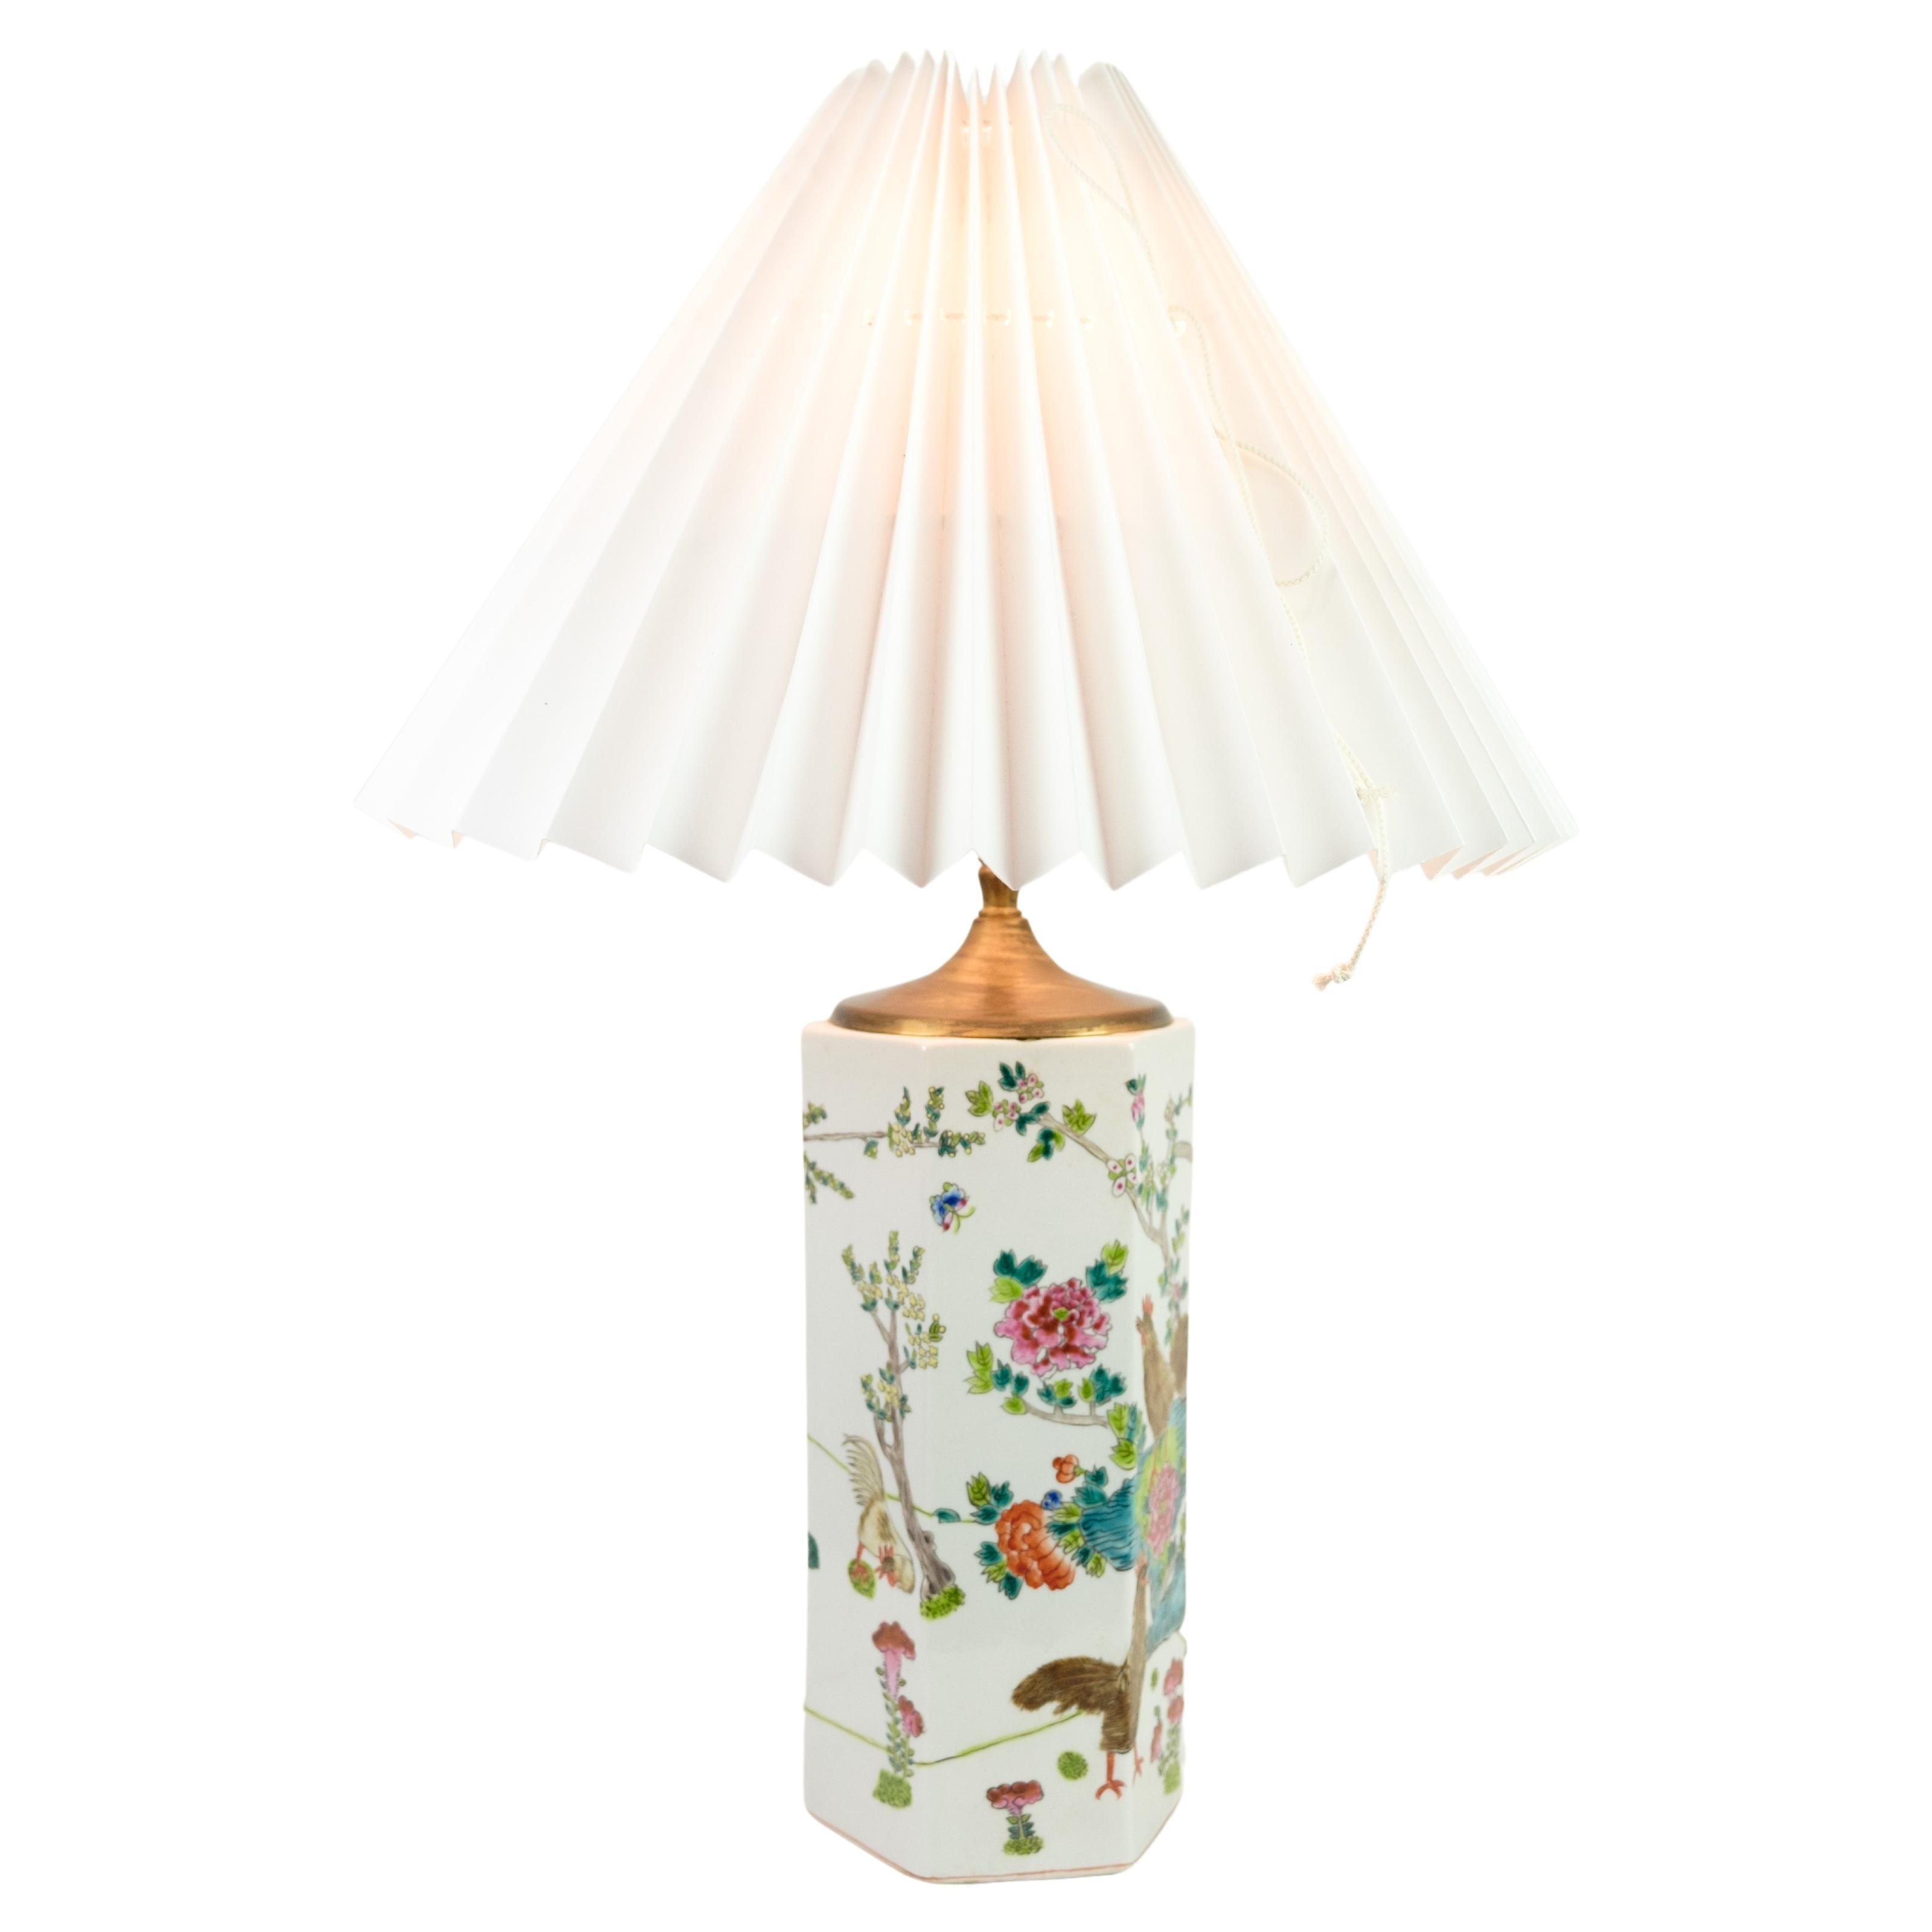 Chinese Table Lamp Made In Porcelain With White Shade From 1920s